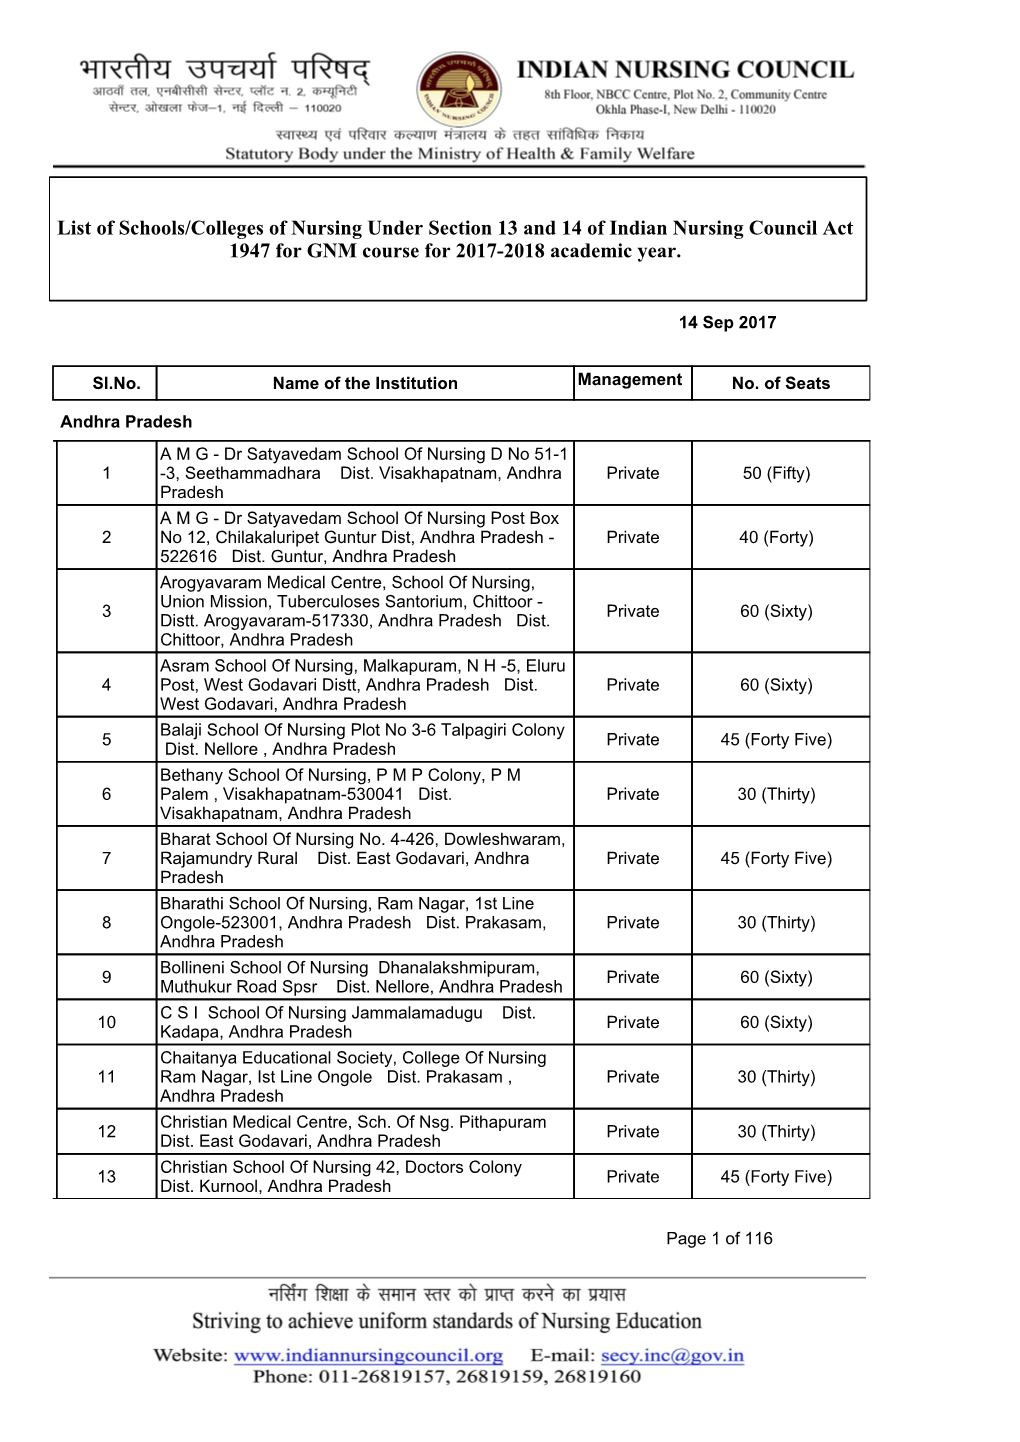 List of Schools/Colleges of Nursing Under Section 13 and 14 of Indian Nursing Council Act 1947 for GNM Course for 2017-2018 Academic Year